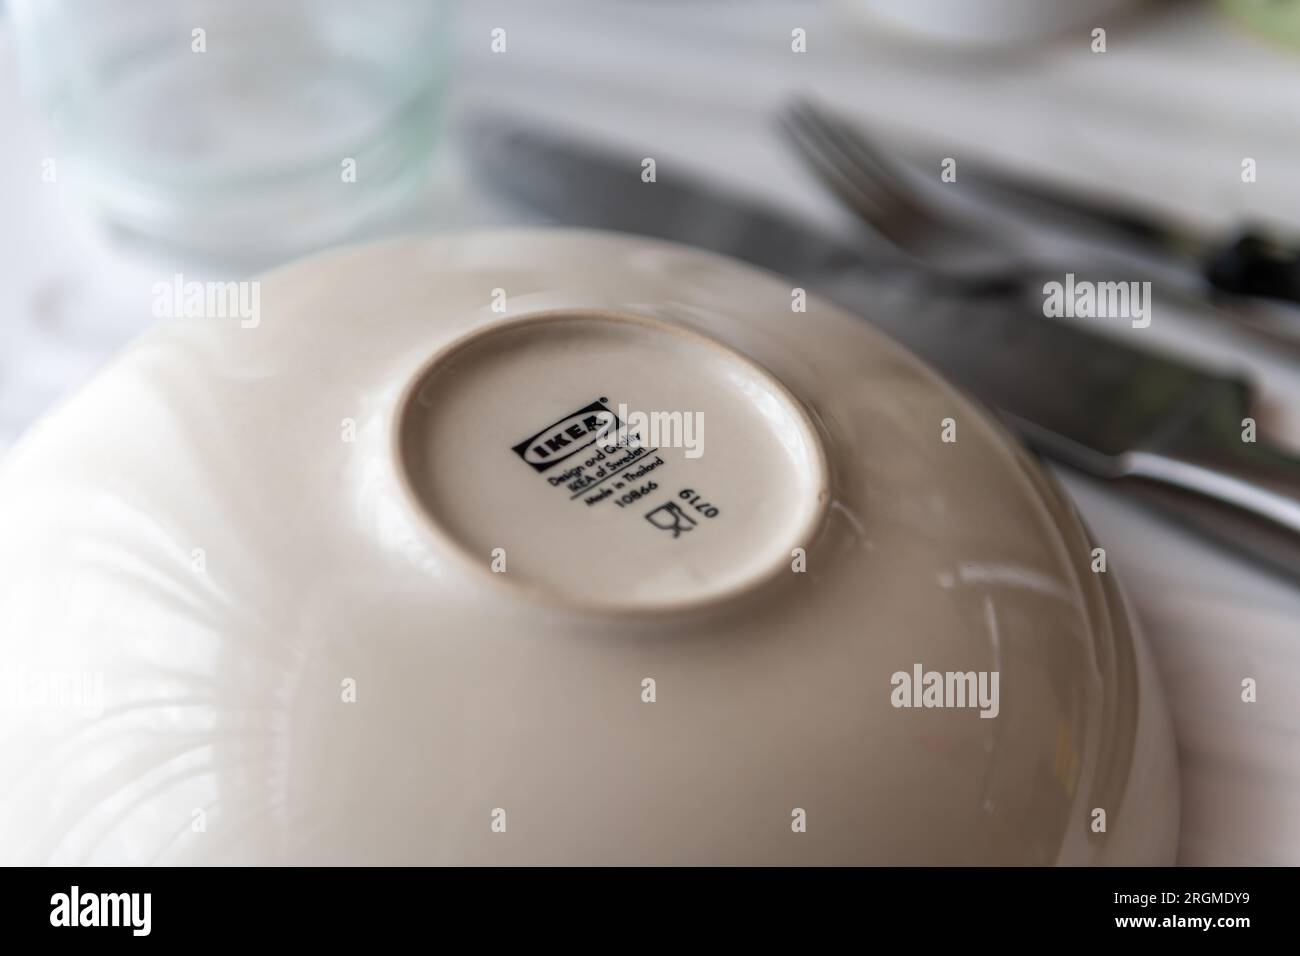 London. UK- 08.04.2023. A plate on the kitchen sunk from the Swedish furniture company Ikea. Stock Photo